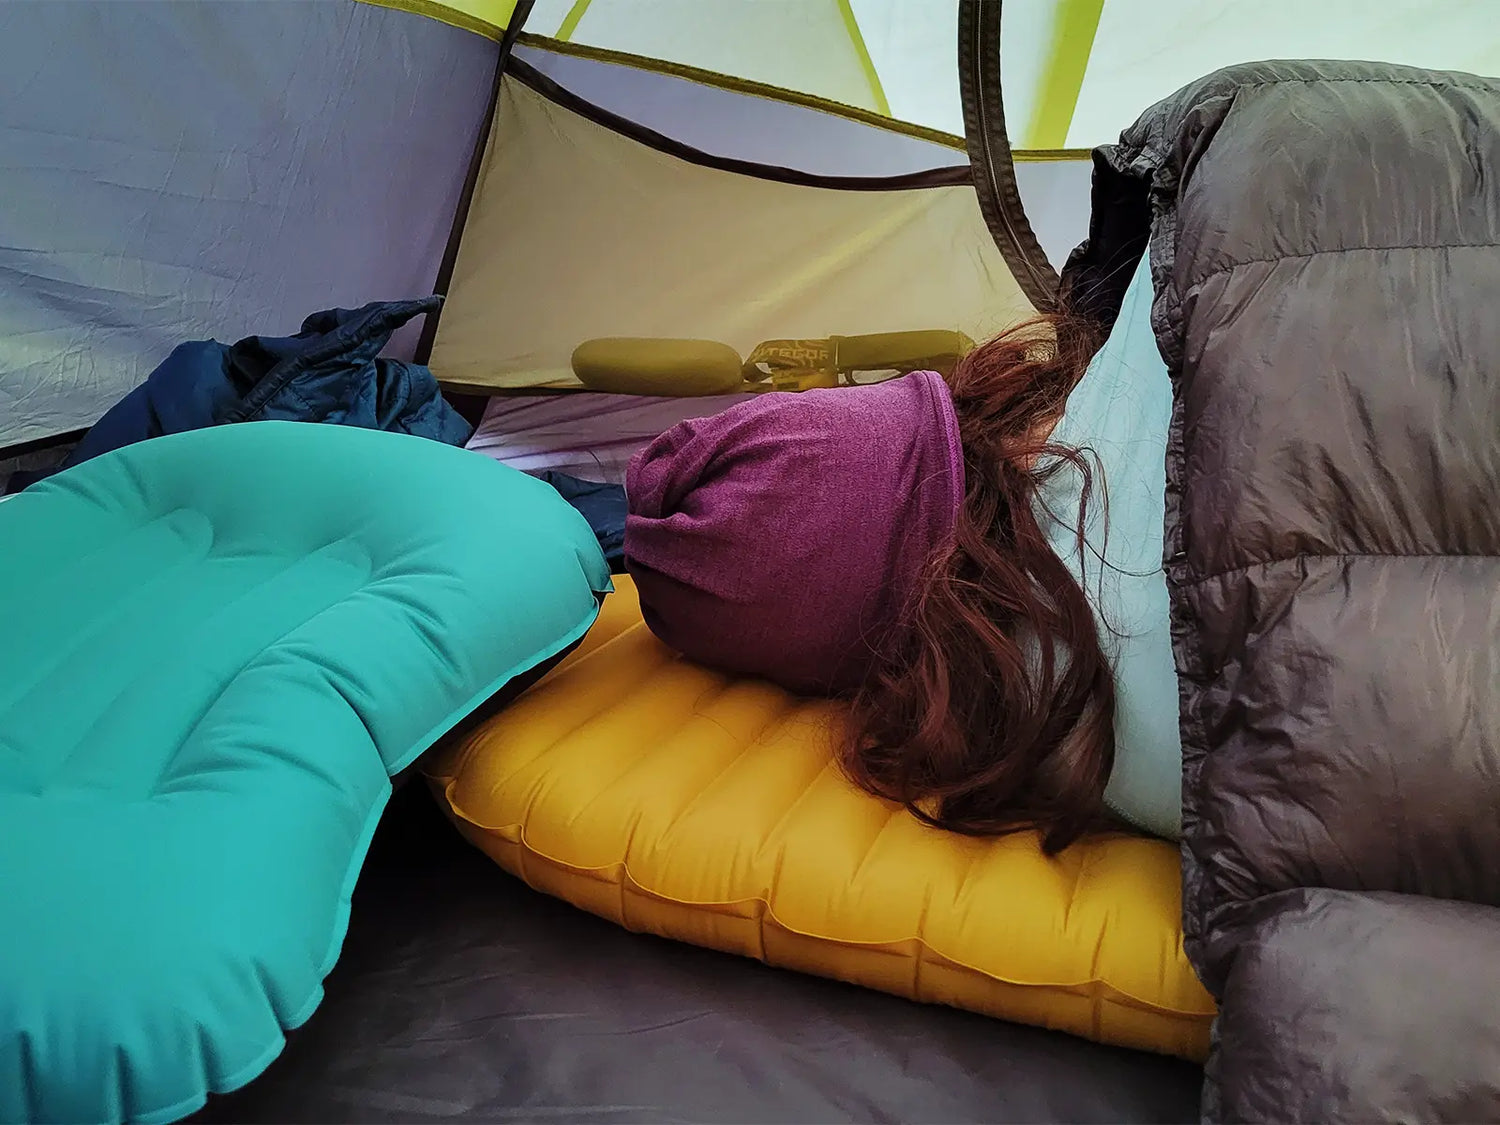 Camp pillow slid out from under head while camping on a sleeping pad in a tent 